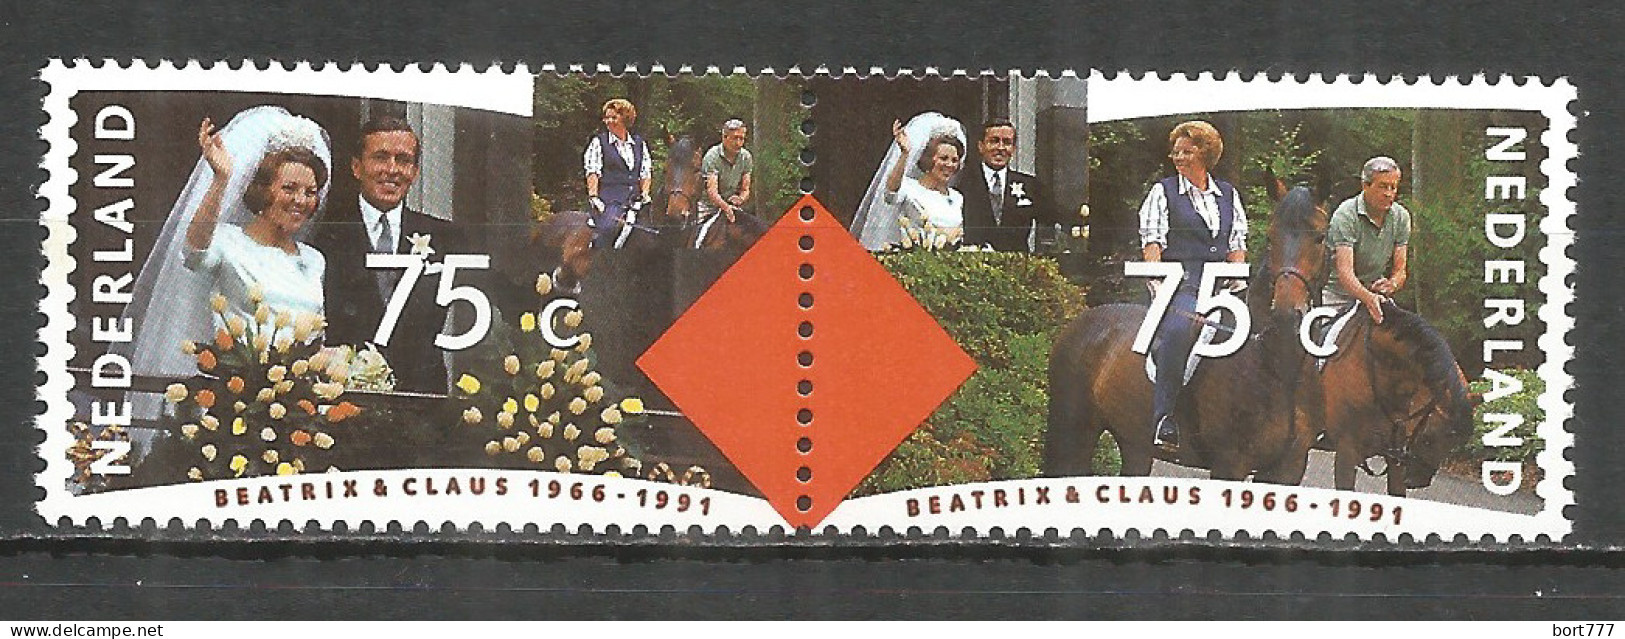 NETHERLANDS 1991 Year , Mint Stamps MNH (**)  - Nuevos